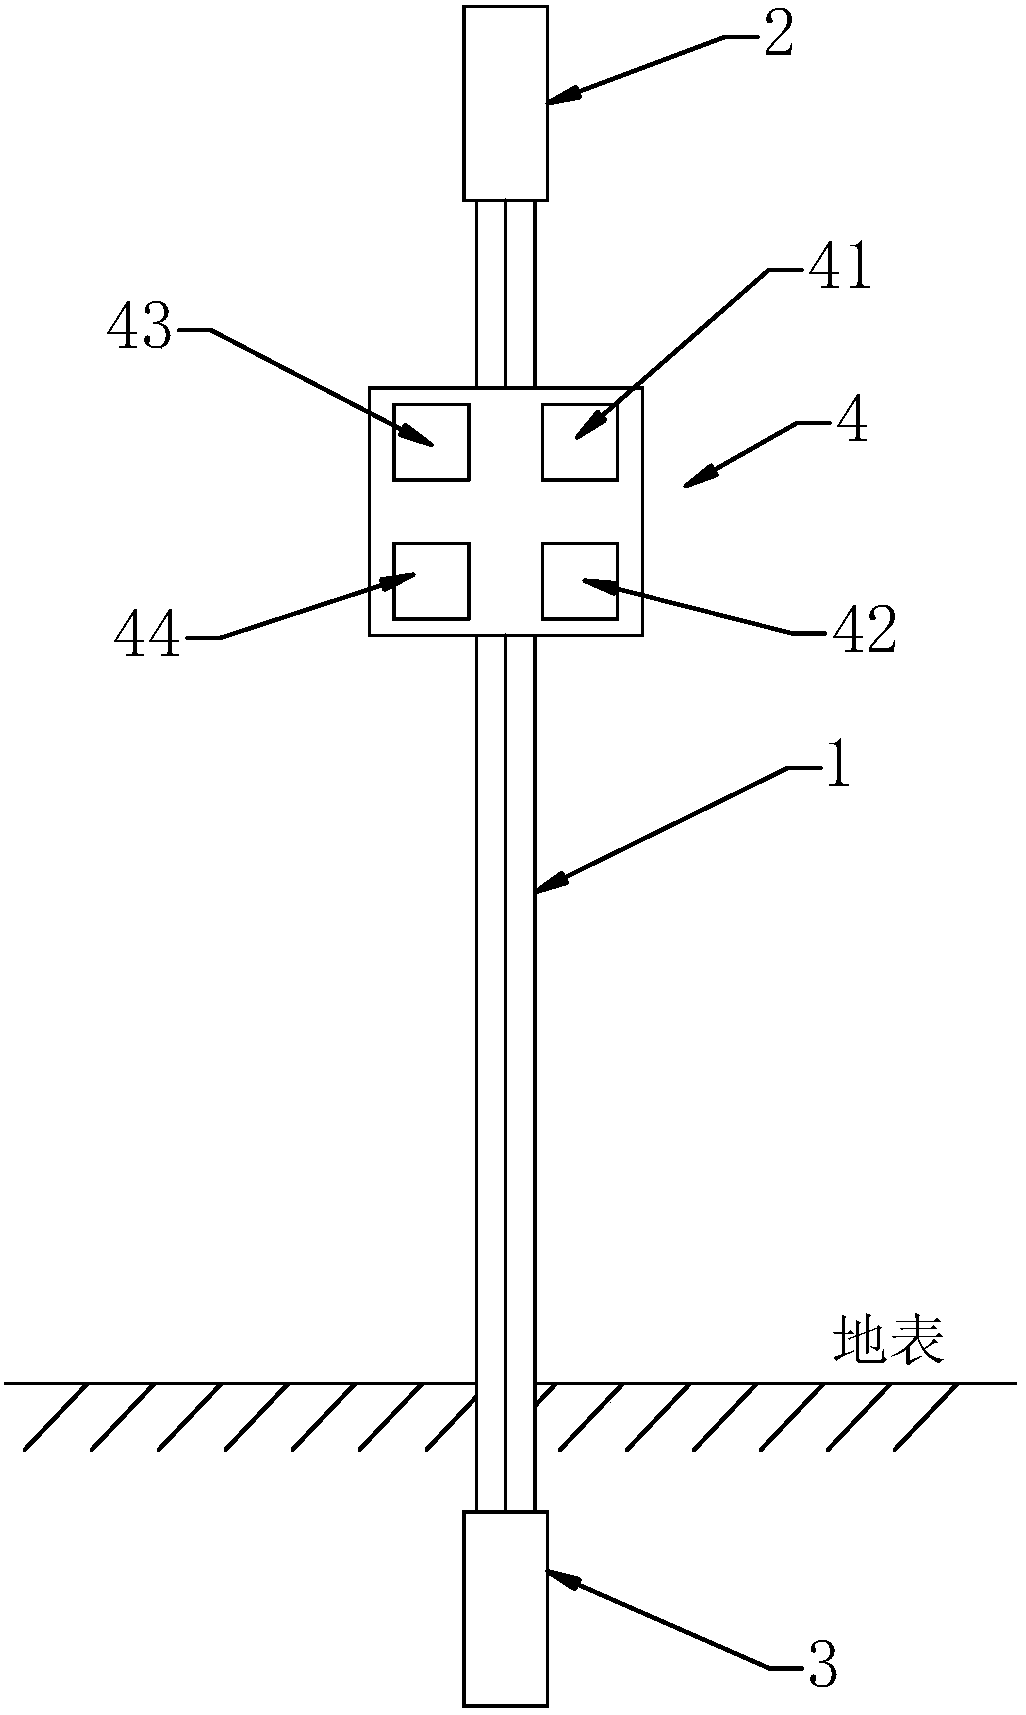 Seismic geoelectric field observation device and method